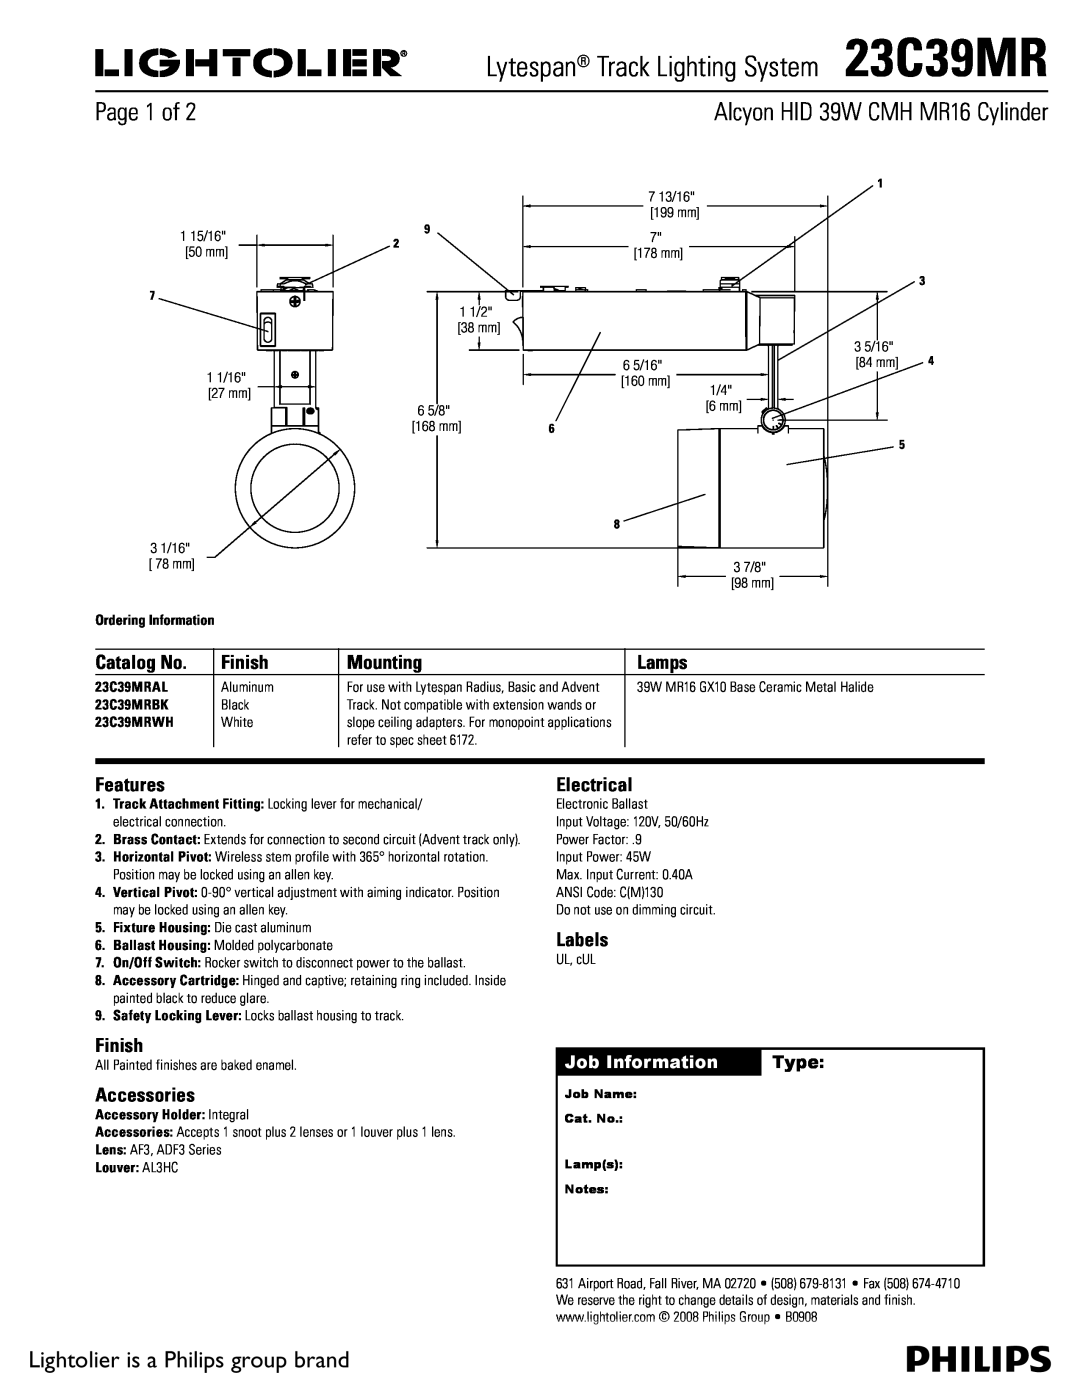 Lightolier manual Lytespan Track Lighting System23C39MR, Alcyon HID 39W CMH MR16 Cylinder, Page 1 of, Catalog No, Lamps 